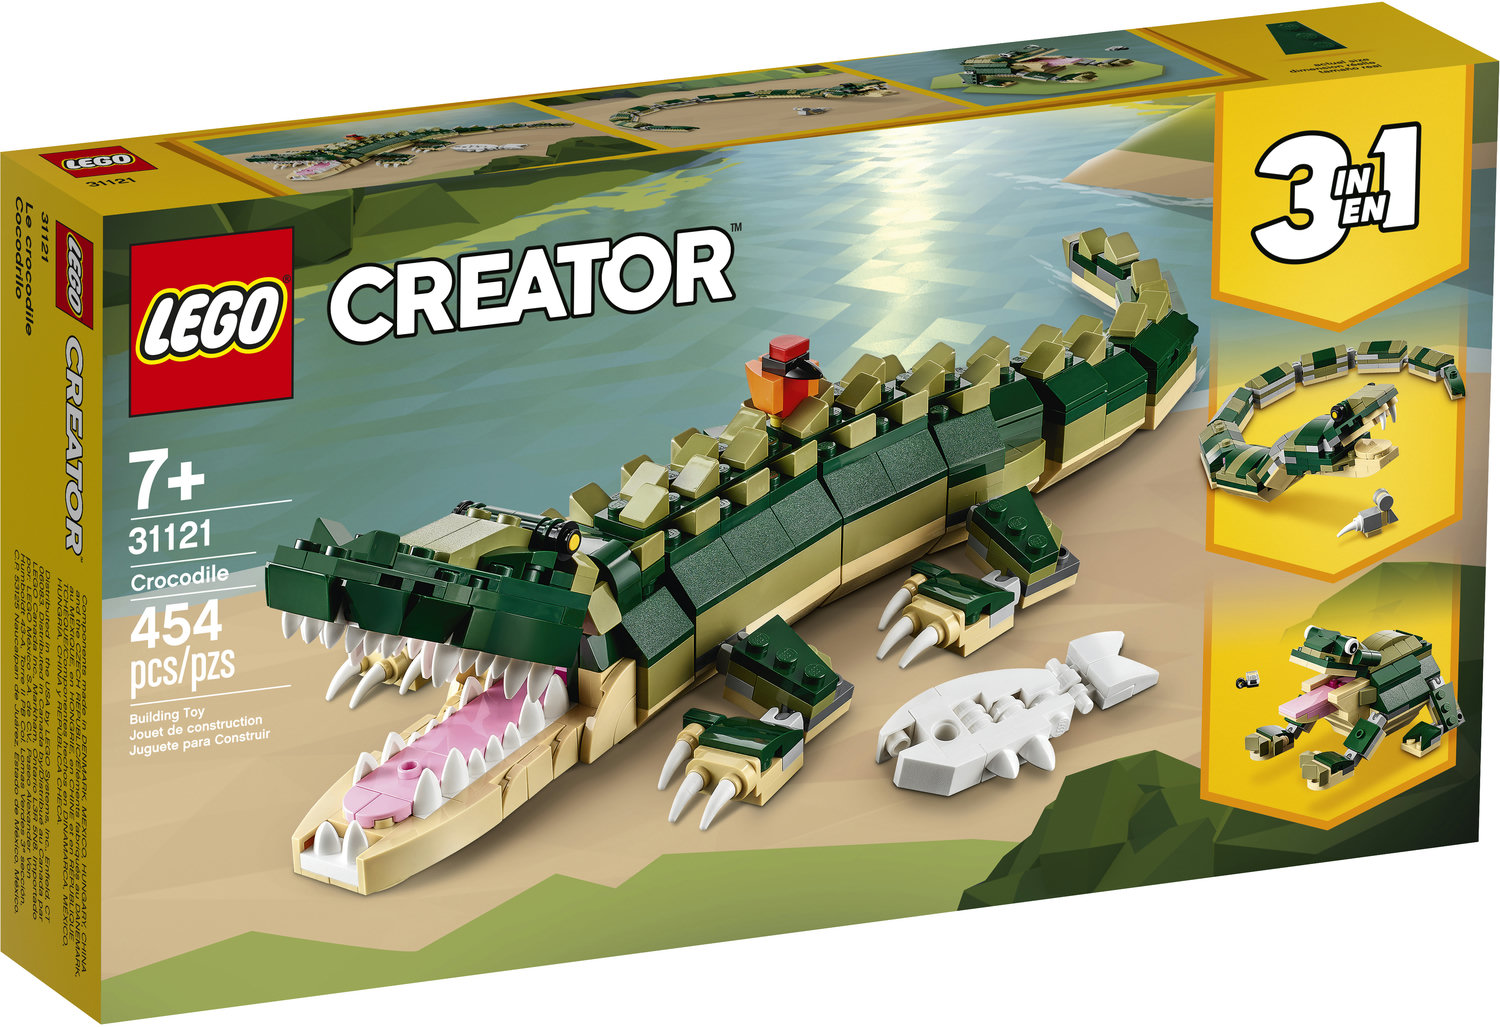 LEGO Creator 3in1 Crocodile 31121 Building Toy Featuring Wild Animal Toys for Kids (454 Pieces) - image 3 of 10